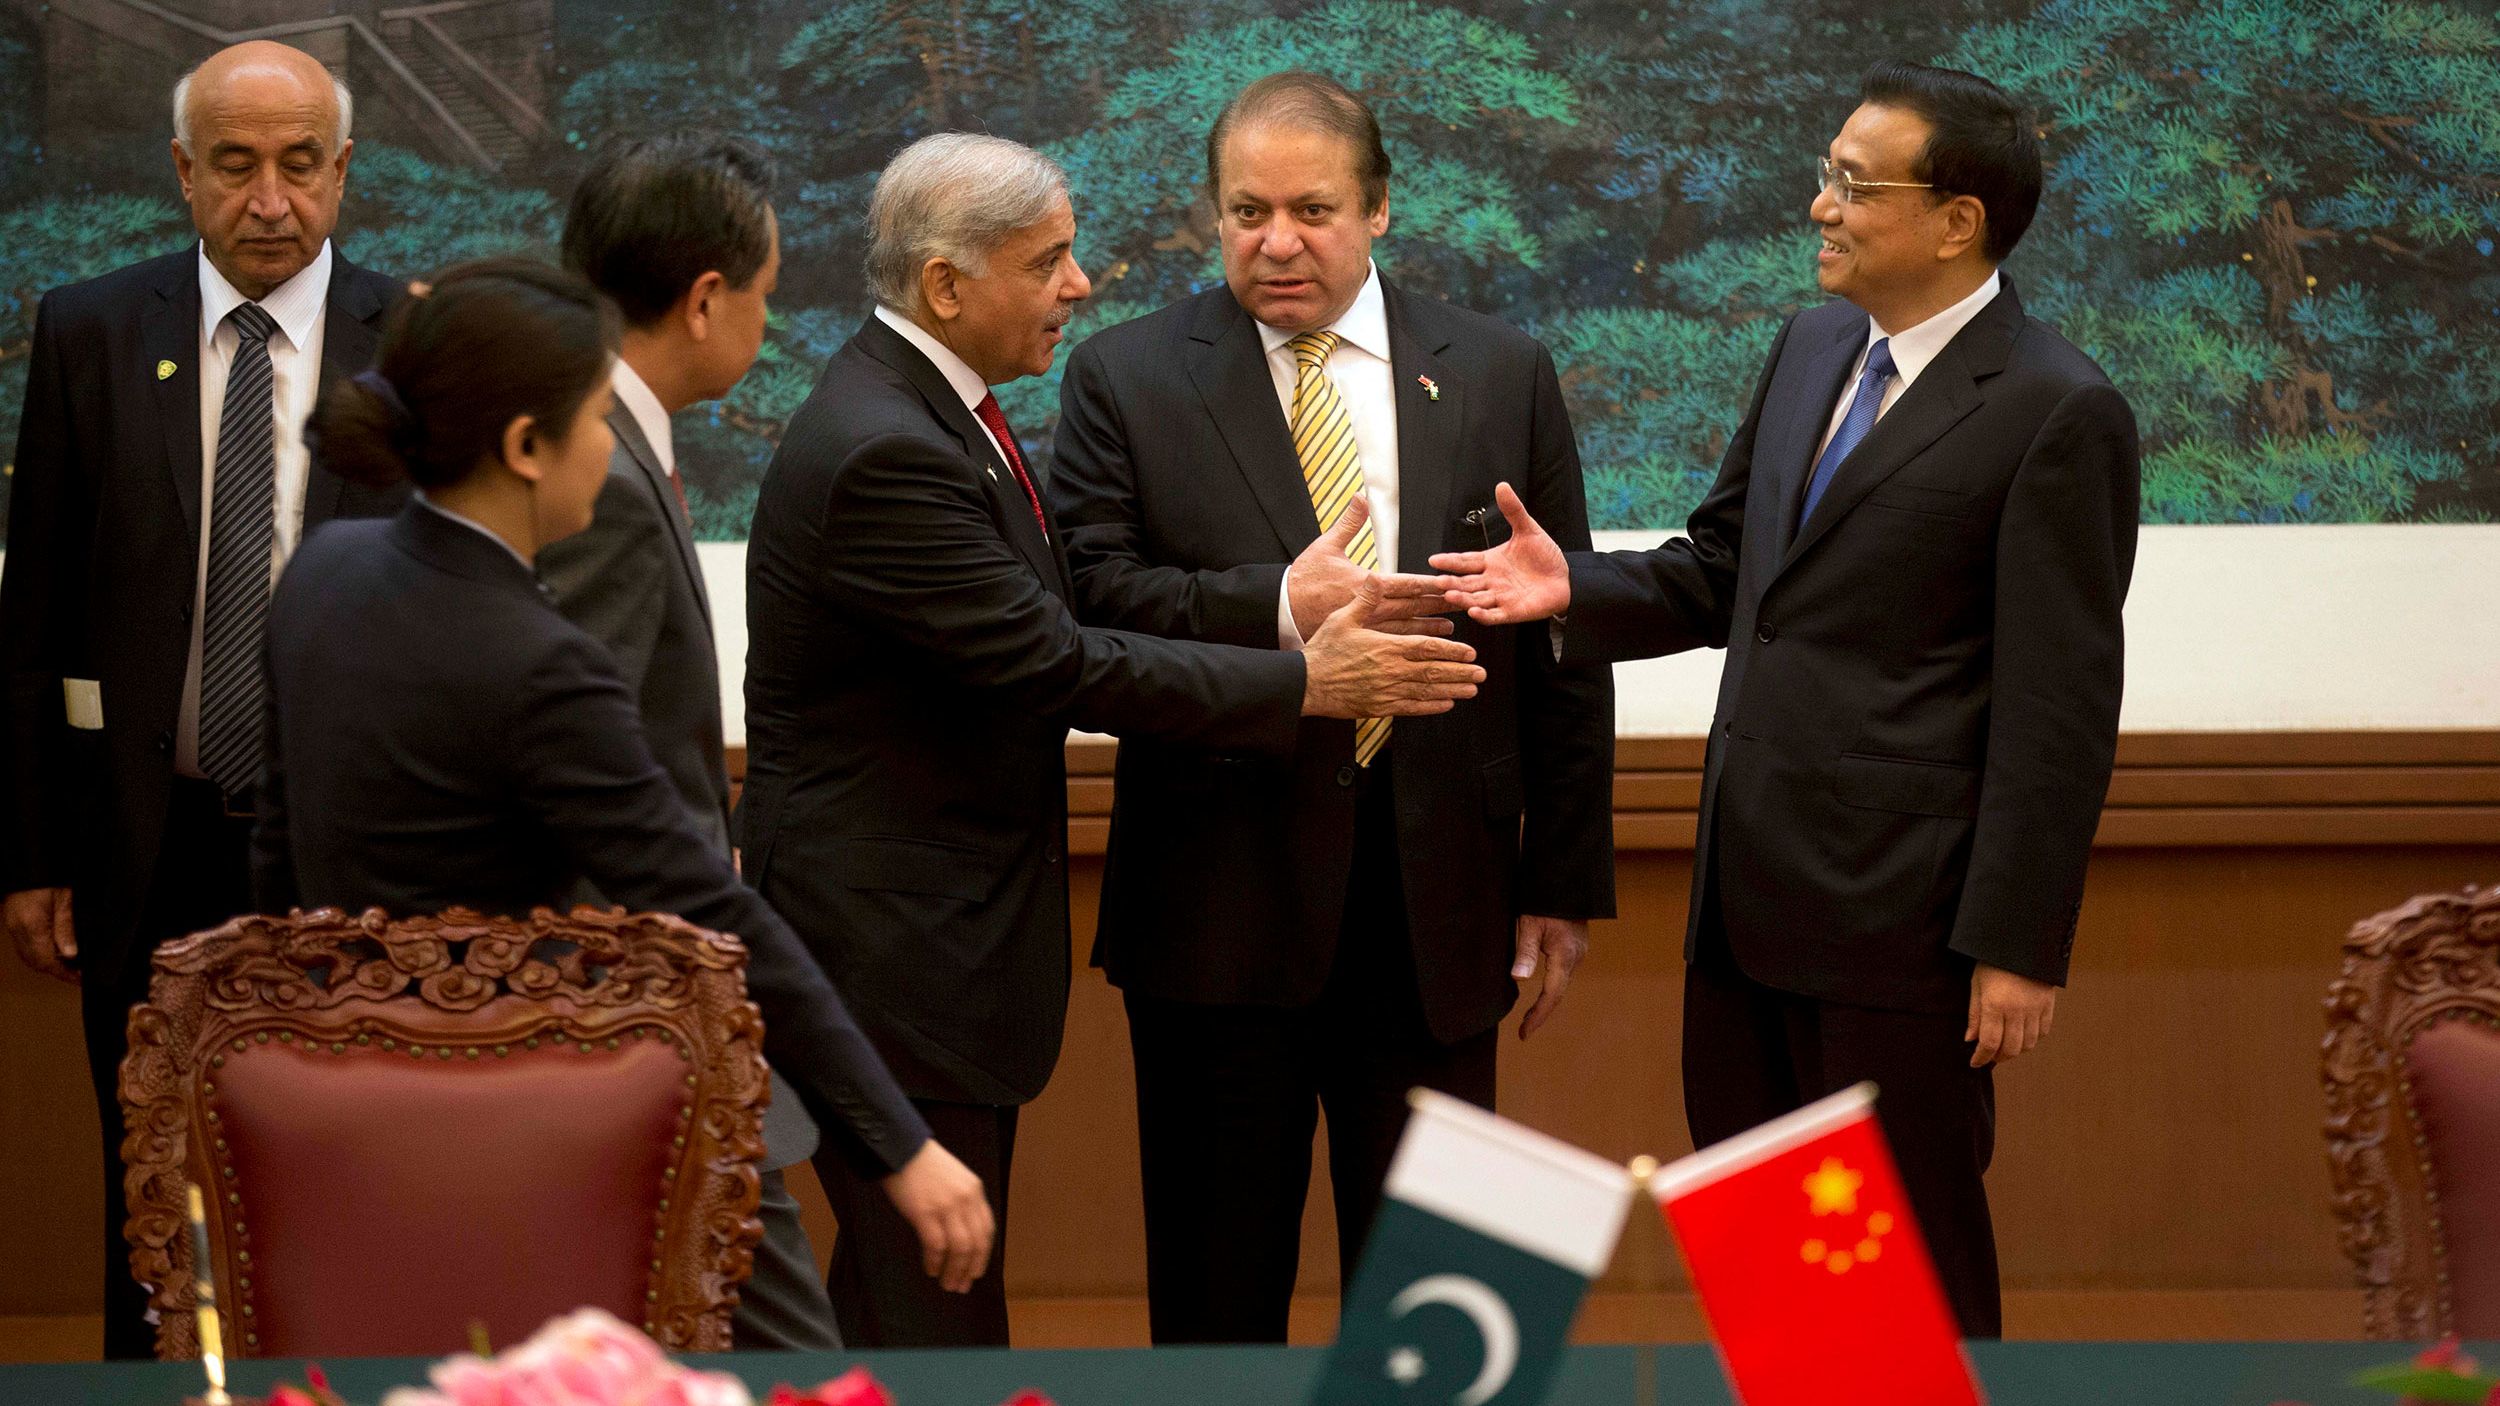 Former Pakistan Prime Minister Nawaz Sharif, second from right, introduces  Shehbaz Sharif, third from right, to Chinese Premier Li Keqiang in Beijing on July 5, 2013. 